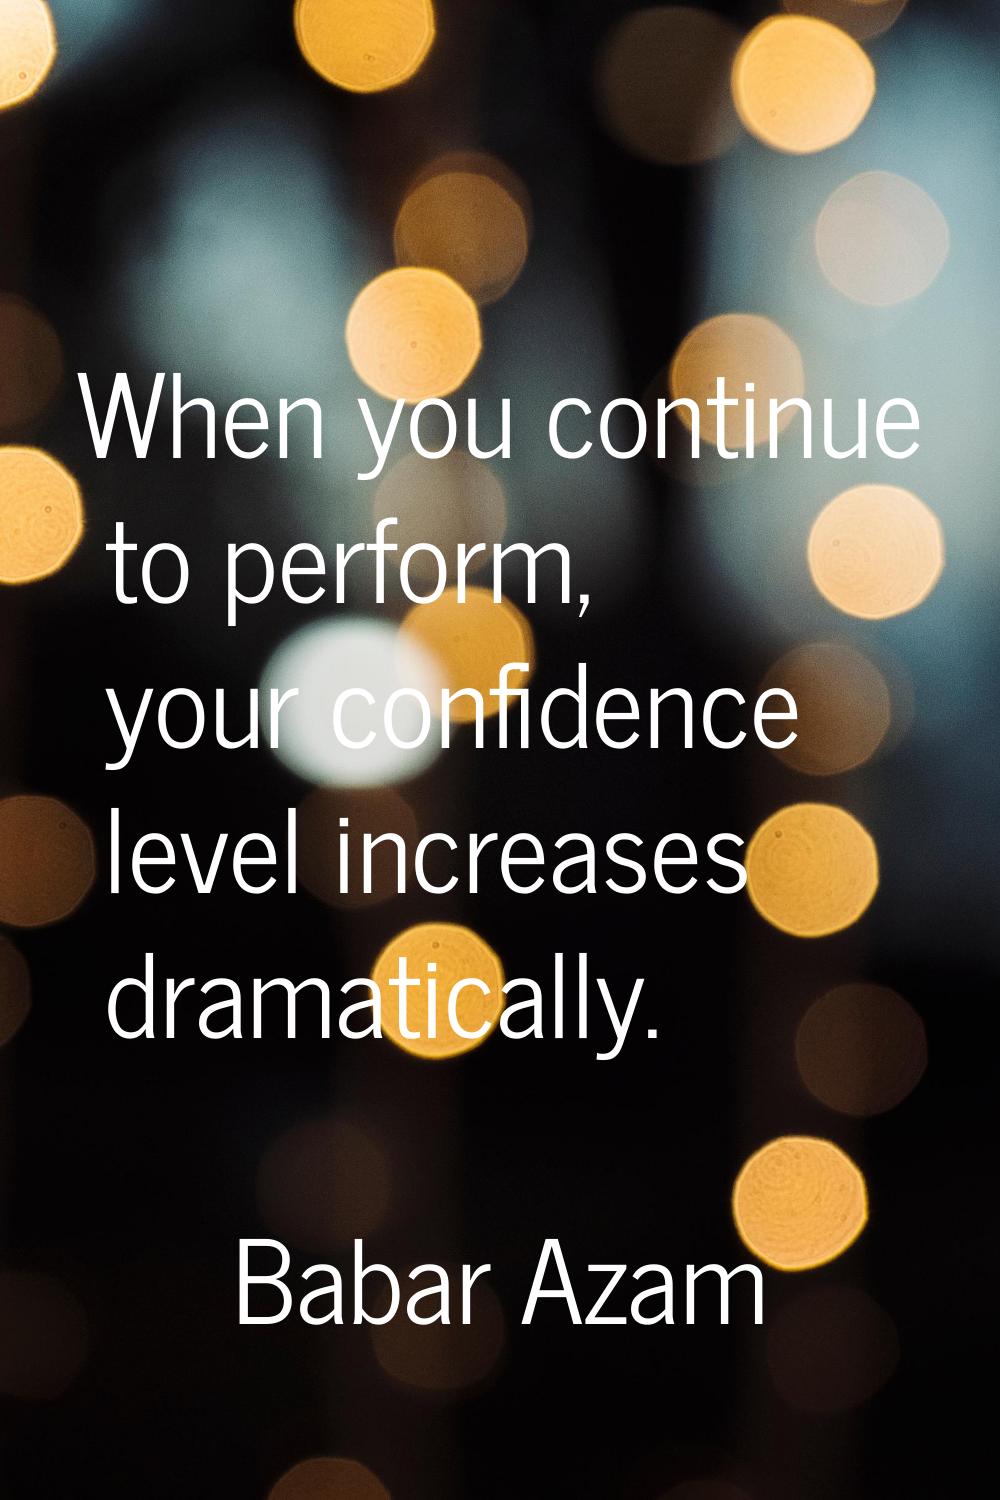 When you continue to perform, your confidence level increases dramatically.